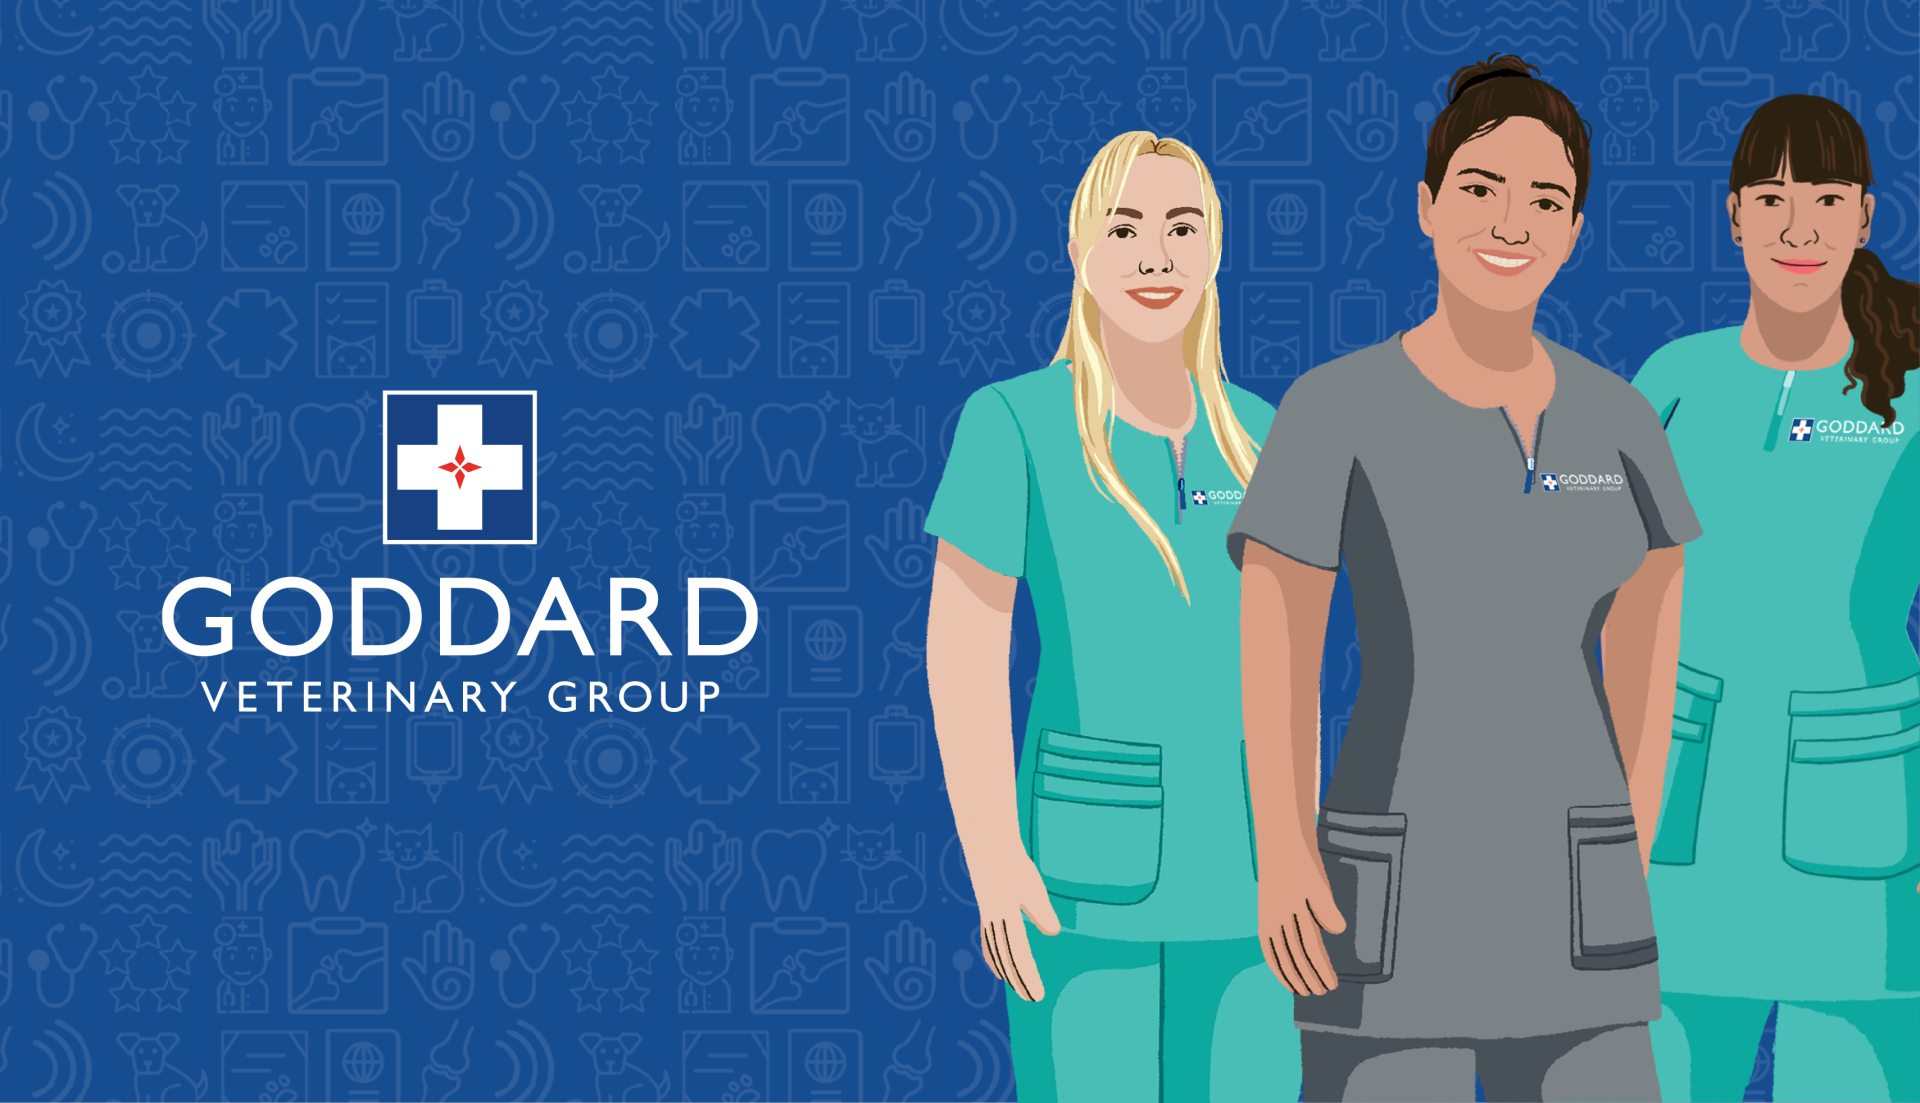 Hear our people stories at Goddard Vet Group